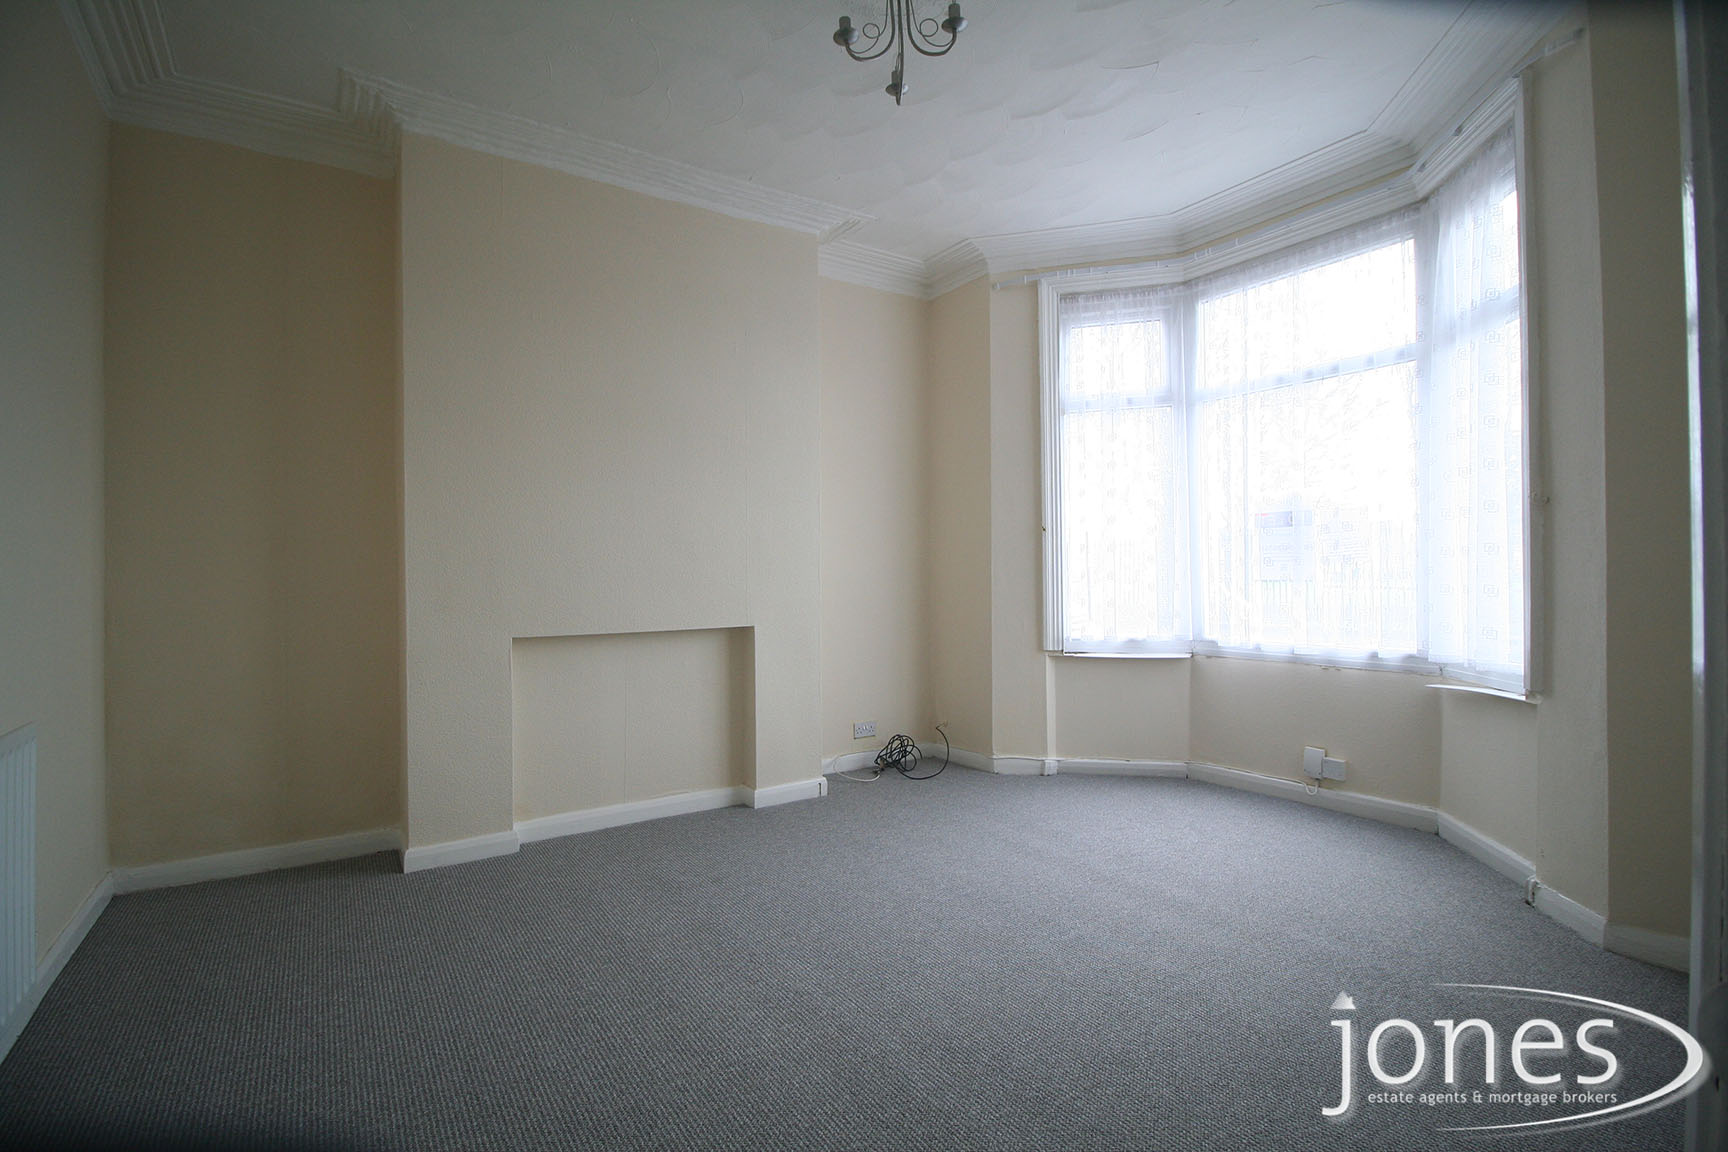 Home for Sale Let - Photo 02 Victoria Road,  Thornaby, Stockton on Tees TS17 6HH